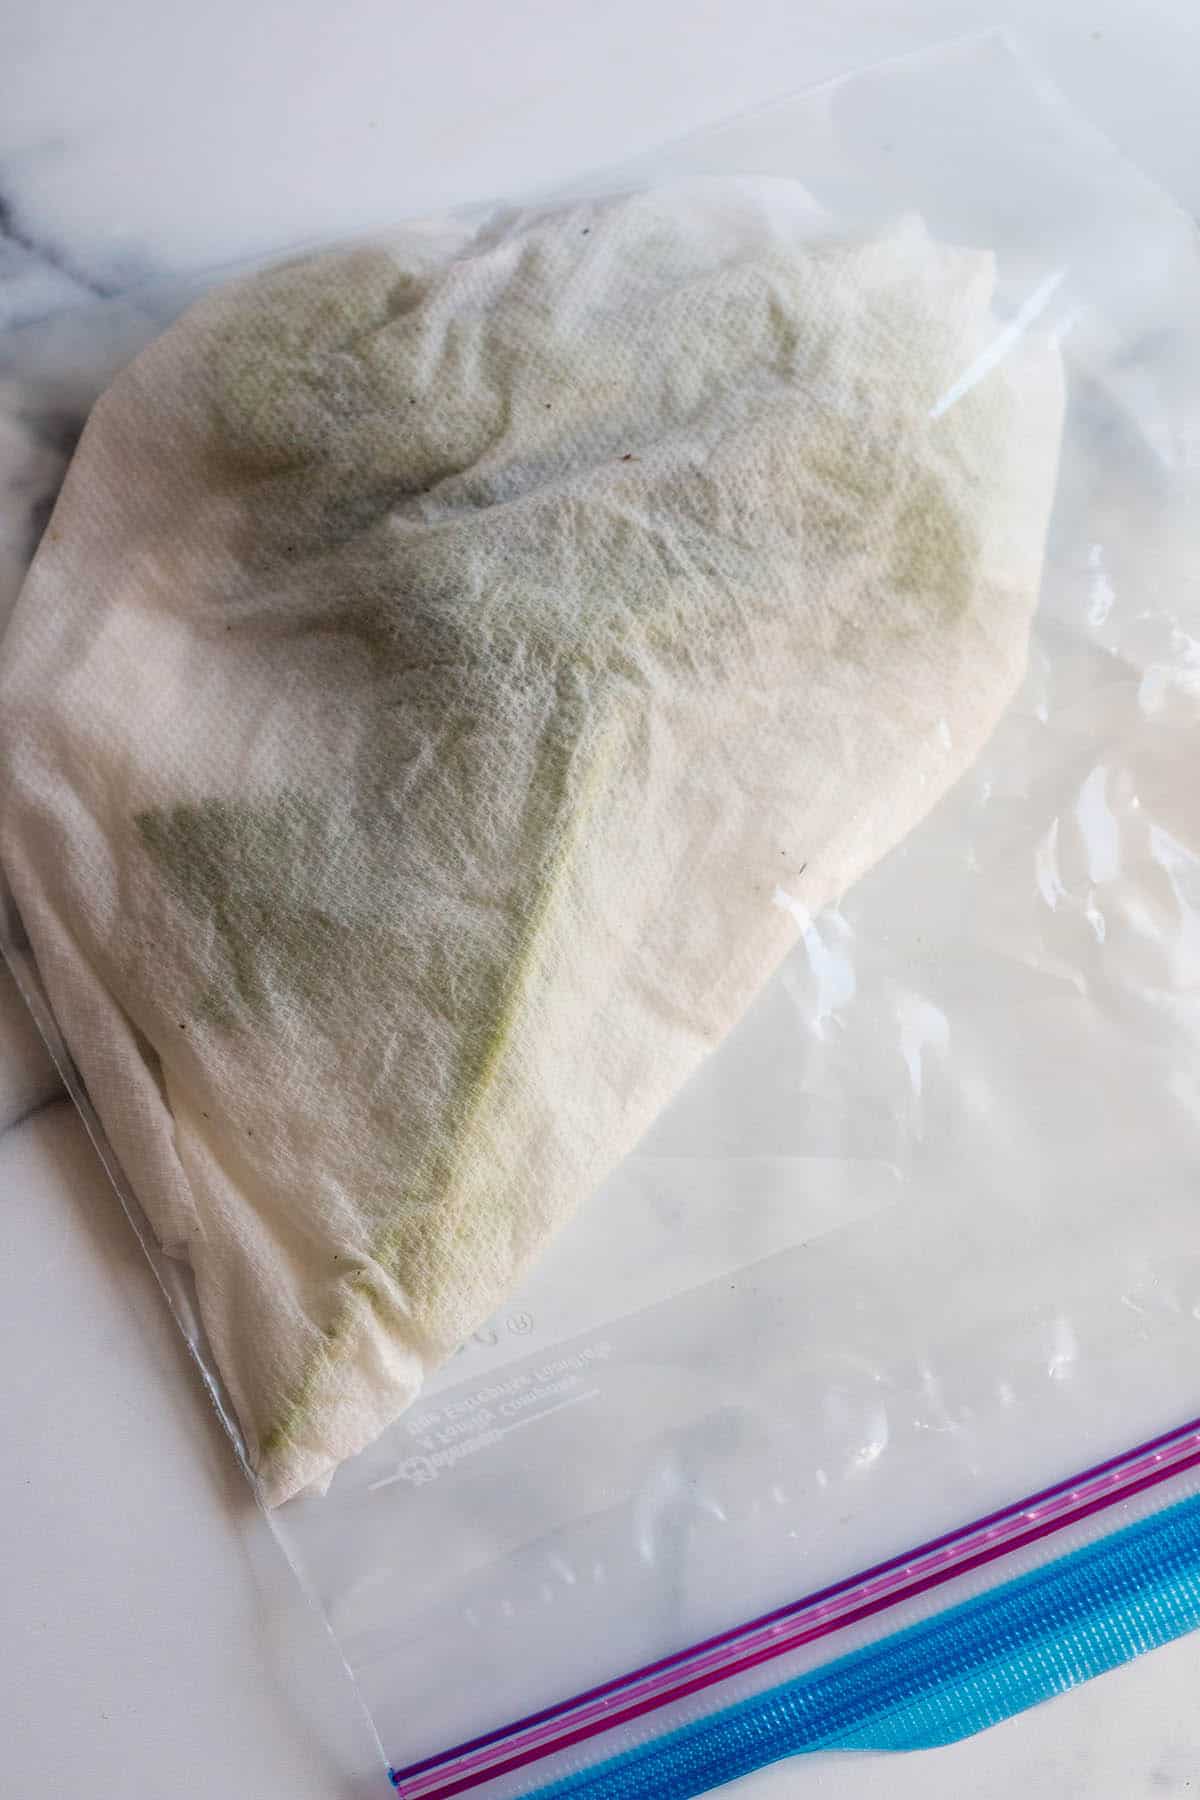 Ziplock bag with a wet paper towel and fresh parsley inside.